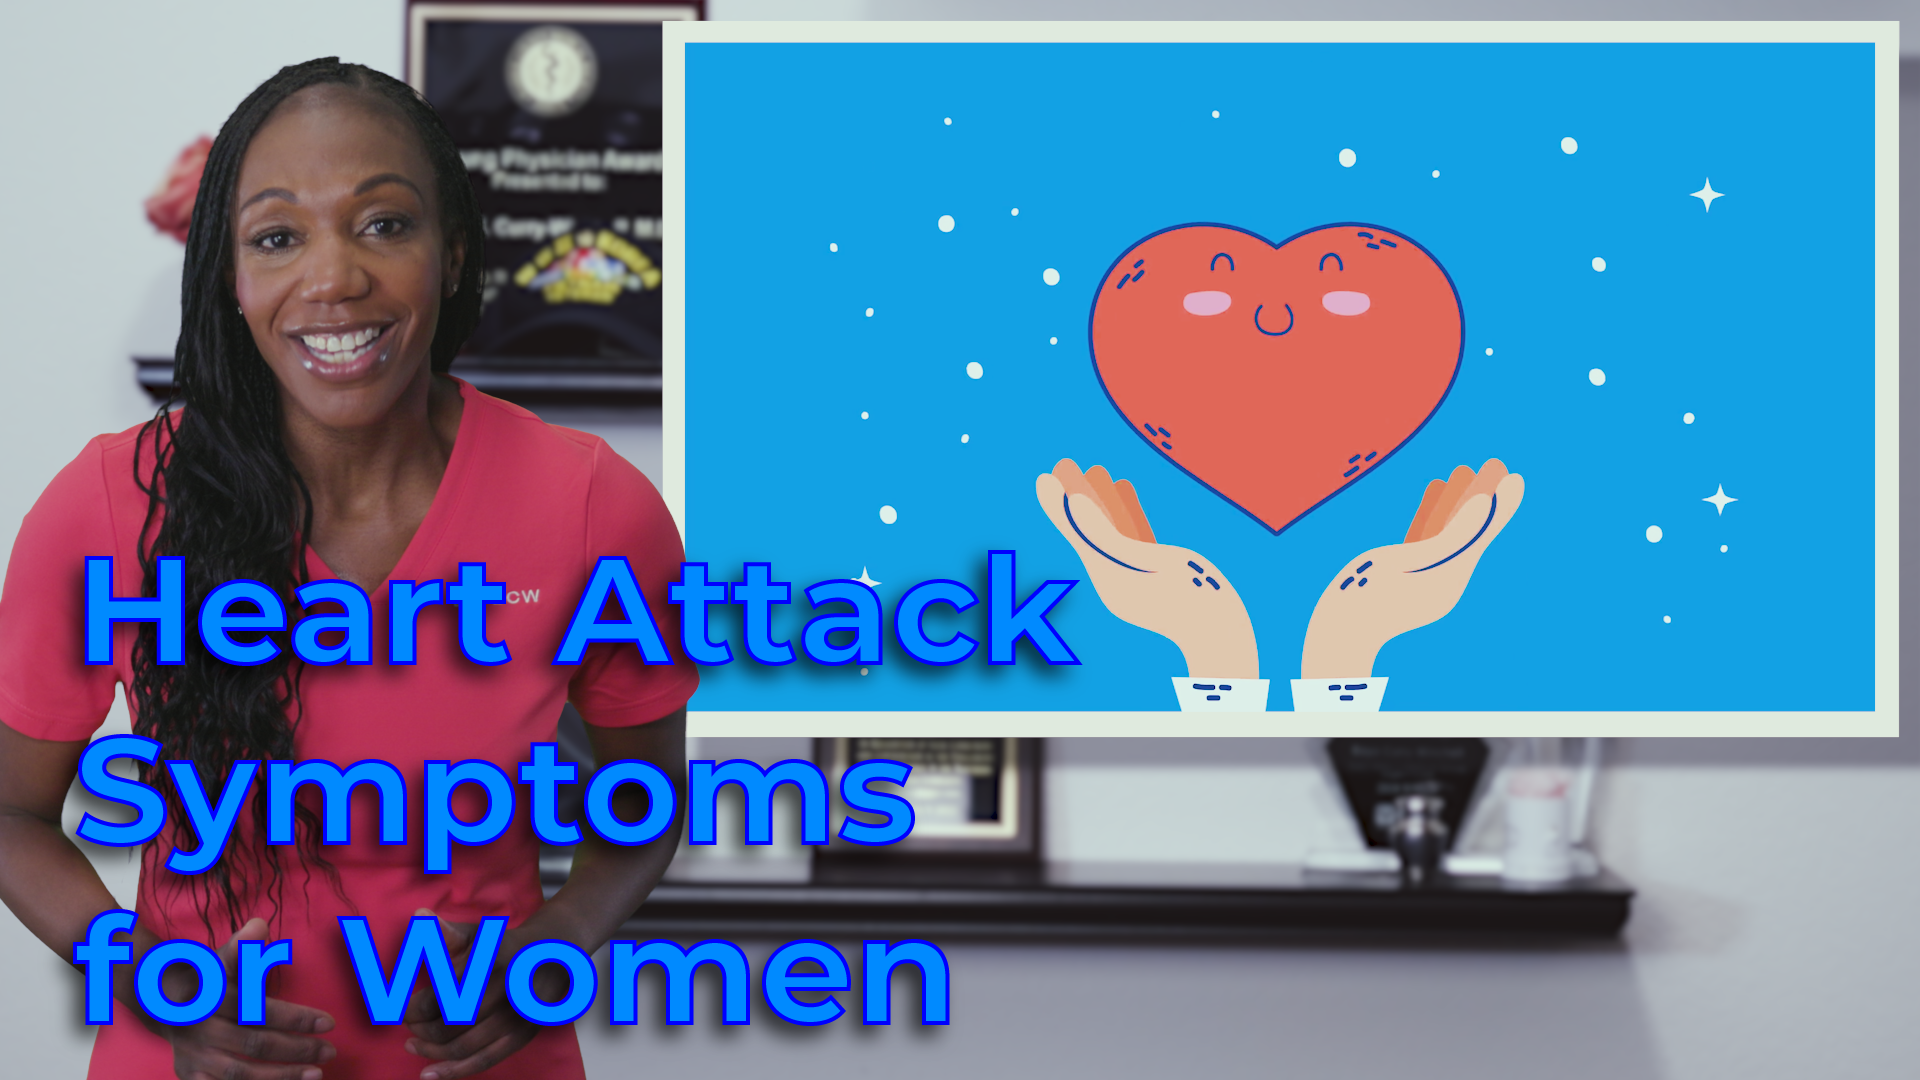 Heart Attack Symptoms for Women, Dr. BCW, Dr. Curry-Winchell